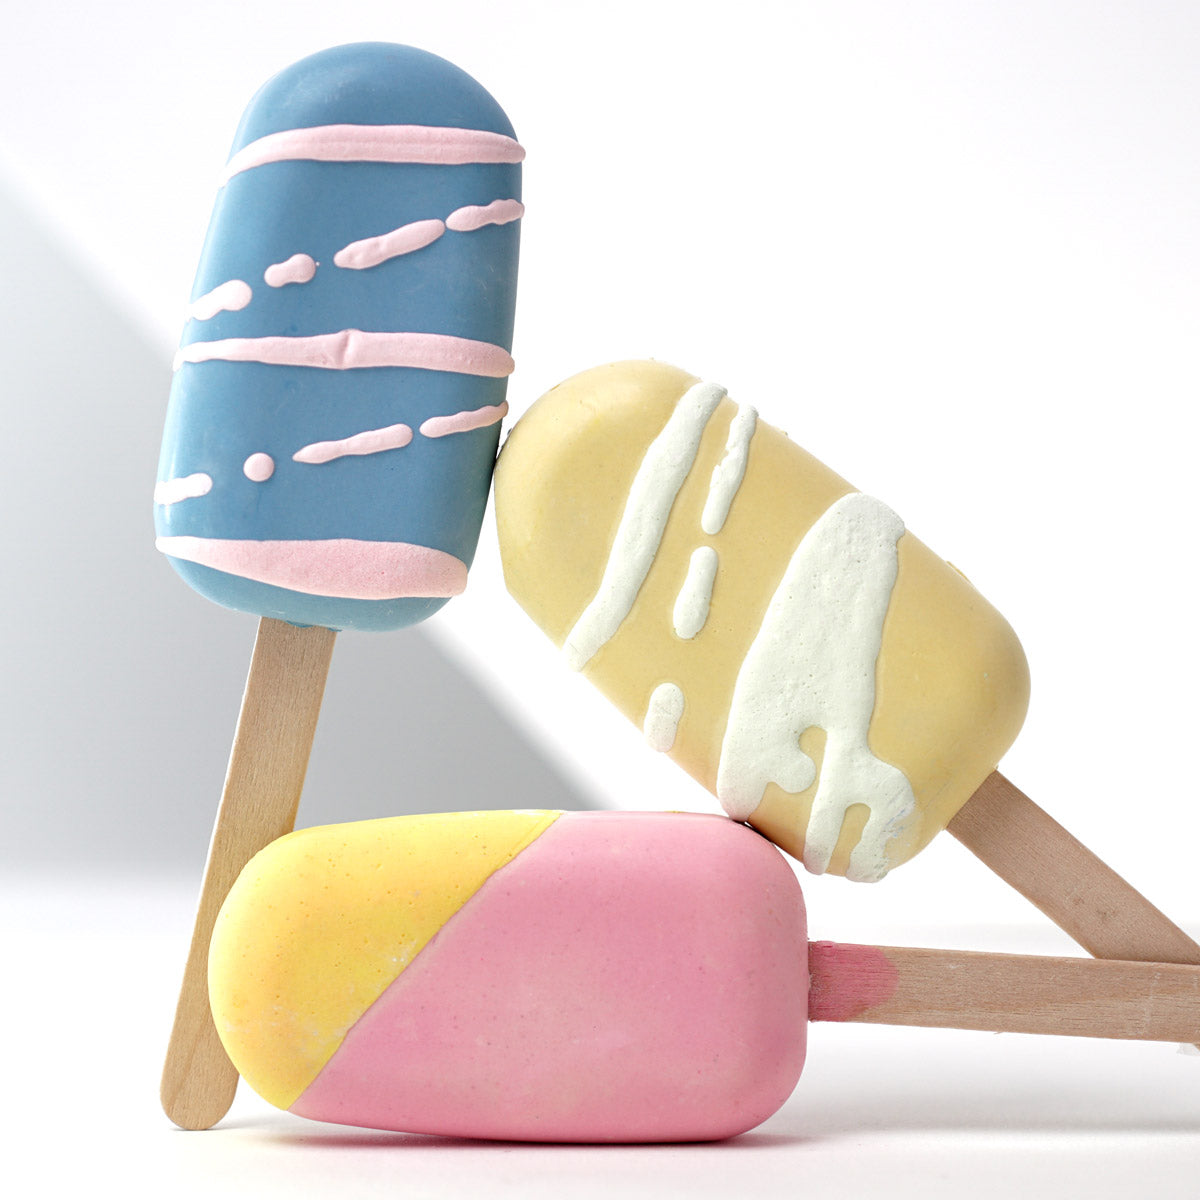 Stay Cool Popsicle Set -  'Restoring vision across the globe'